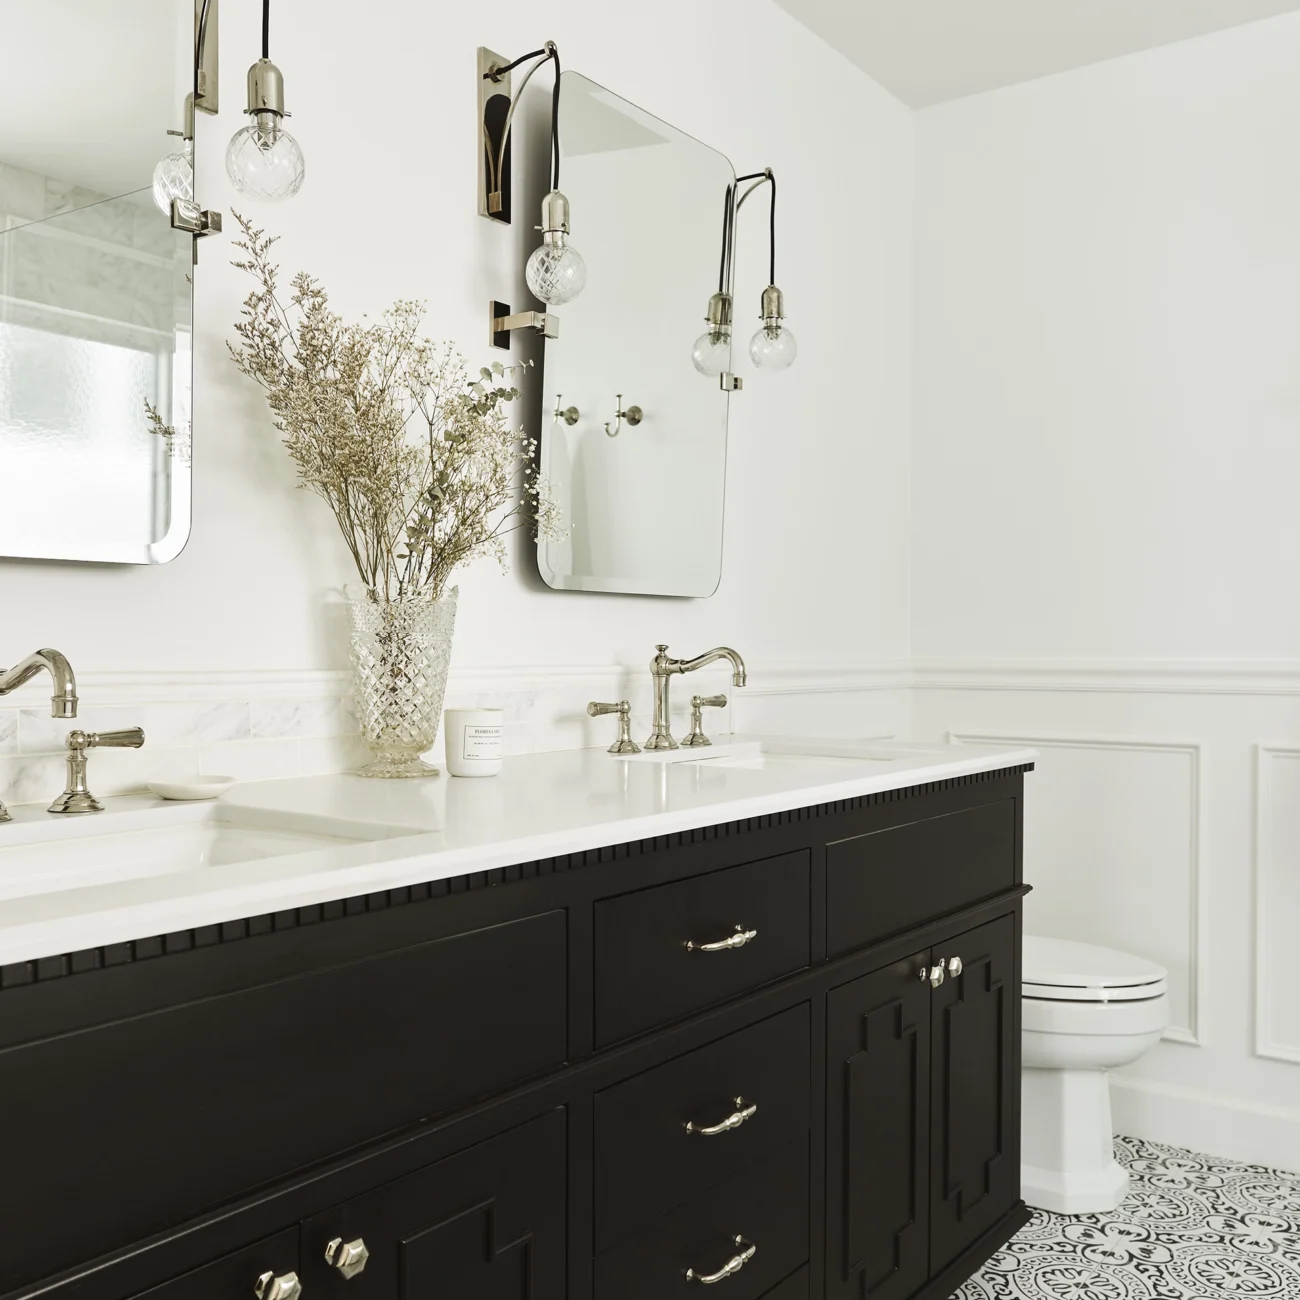 Christine Vroom Interiors | Gentry | Bright, white bathroom with soaker tub and balck vanity